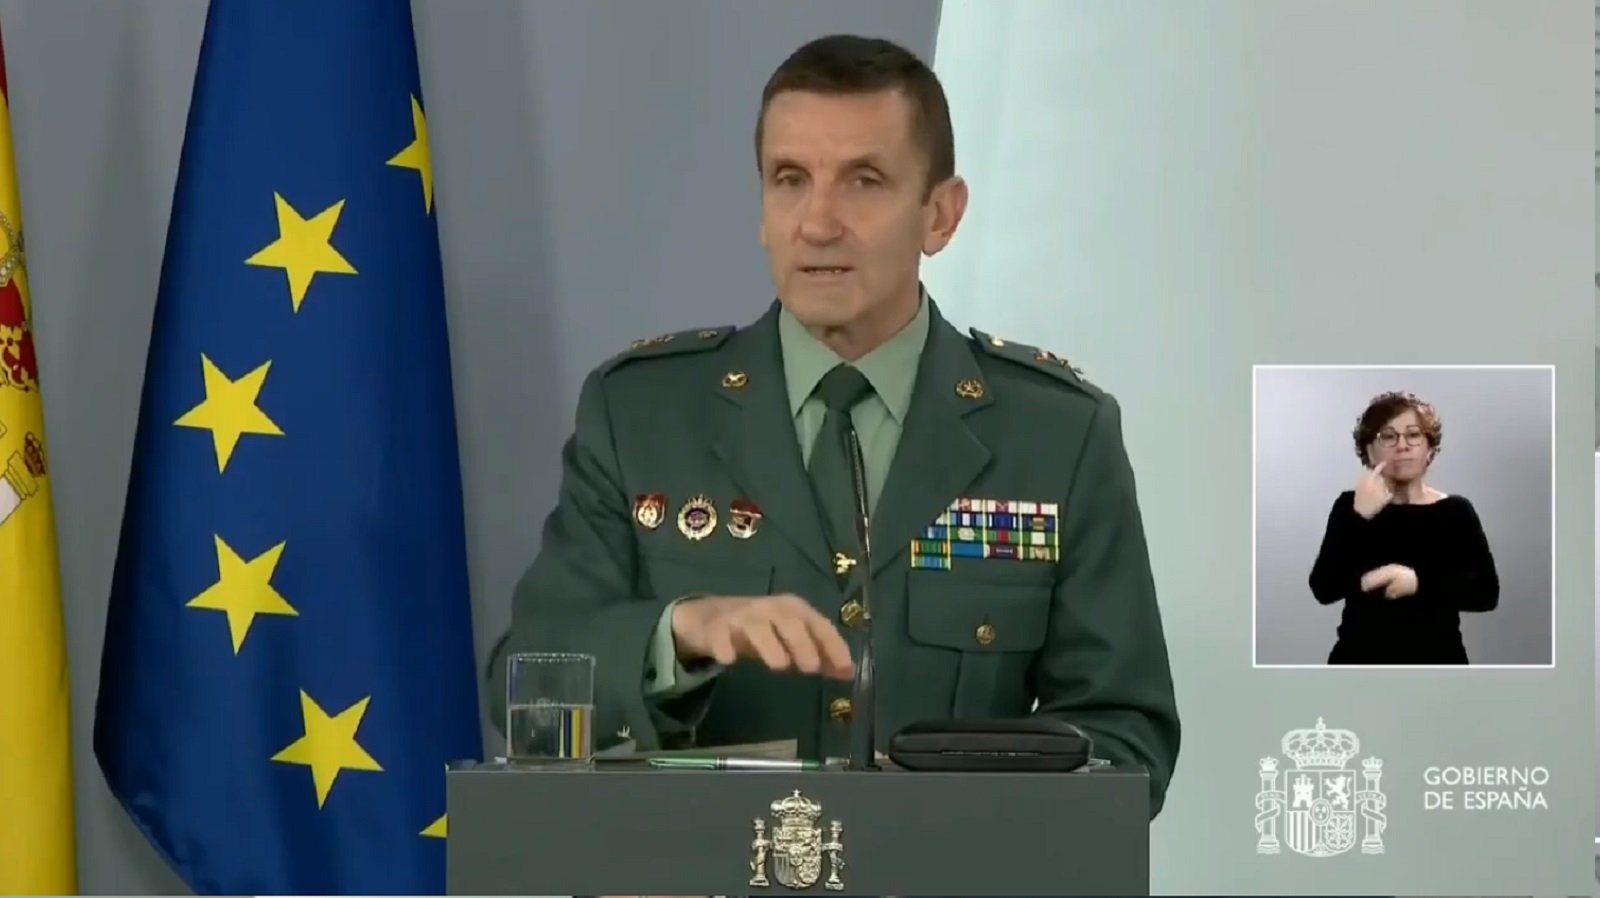 Spanish Civil Guard head: "Our job, to reduce negative climate towards the government"